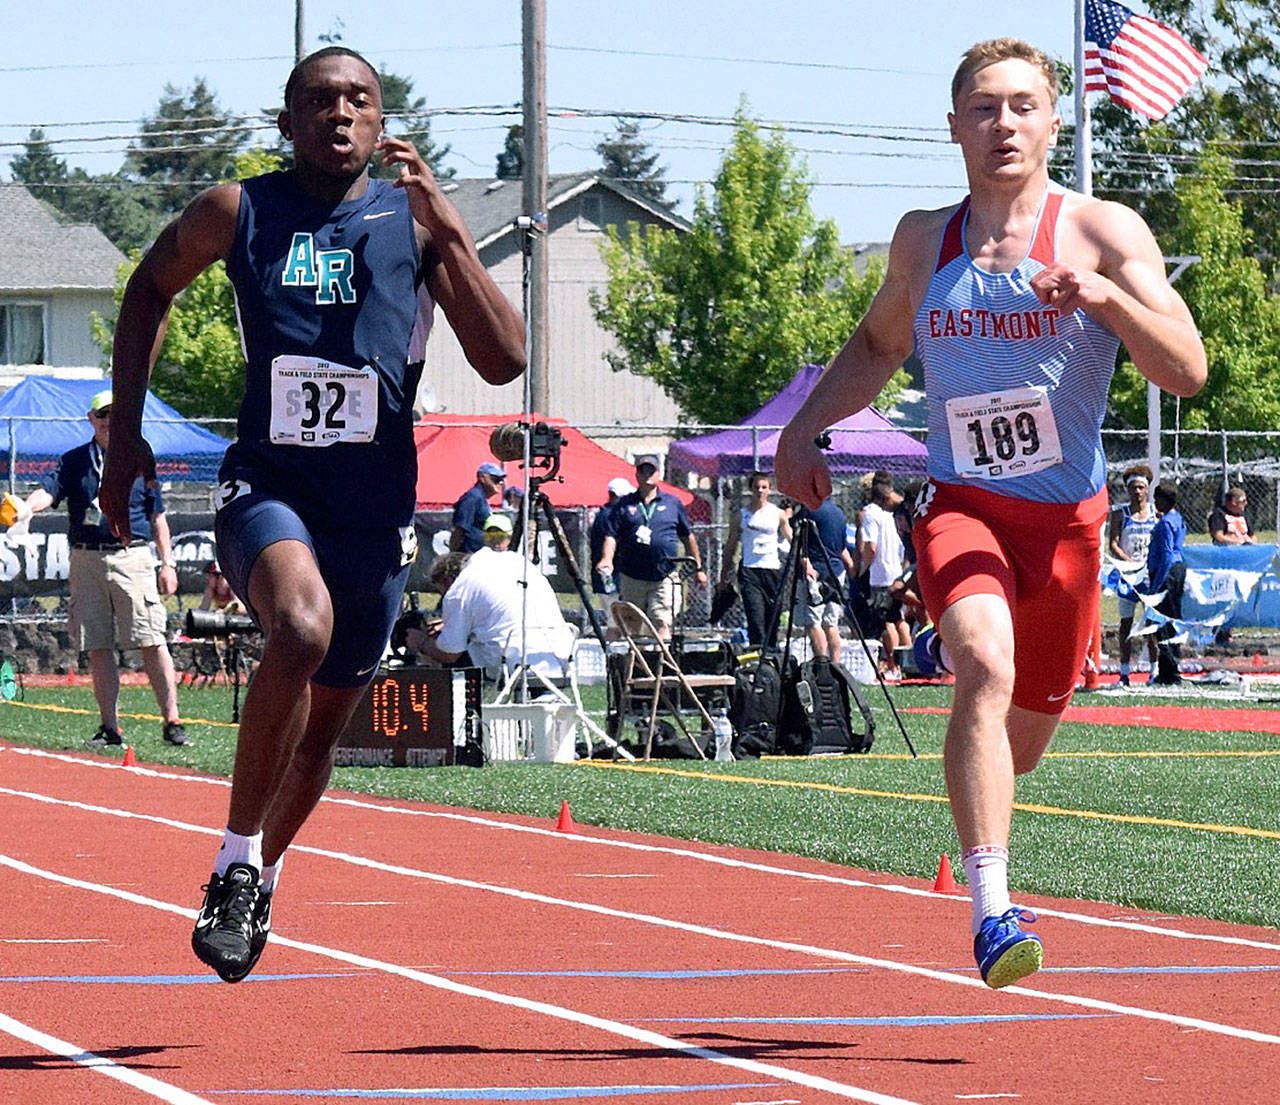 Auburn Riverside’s Jaden Robinson, left, scoots to a sixth-place finish in the 4A state 100-meter final in 10.74 seconds. Eastmont’s Jake Ulrich, right, was seventh. Robinson added a seventh-place finish in the 200 final with a time of 21.81. RACHEL CIAMPI, Auburn Reporter